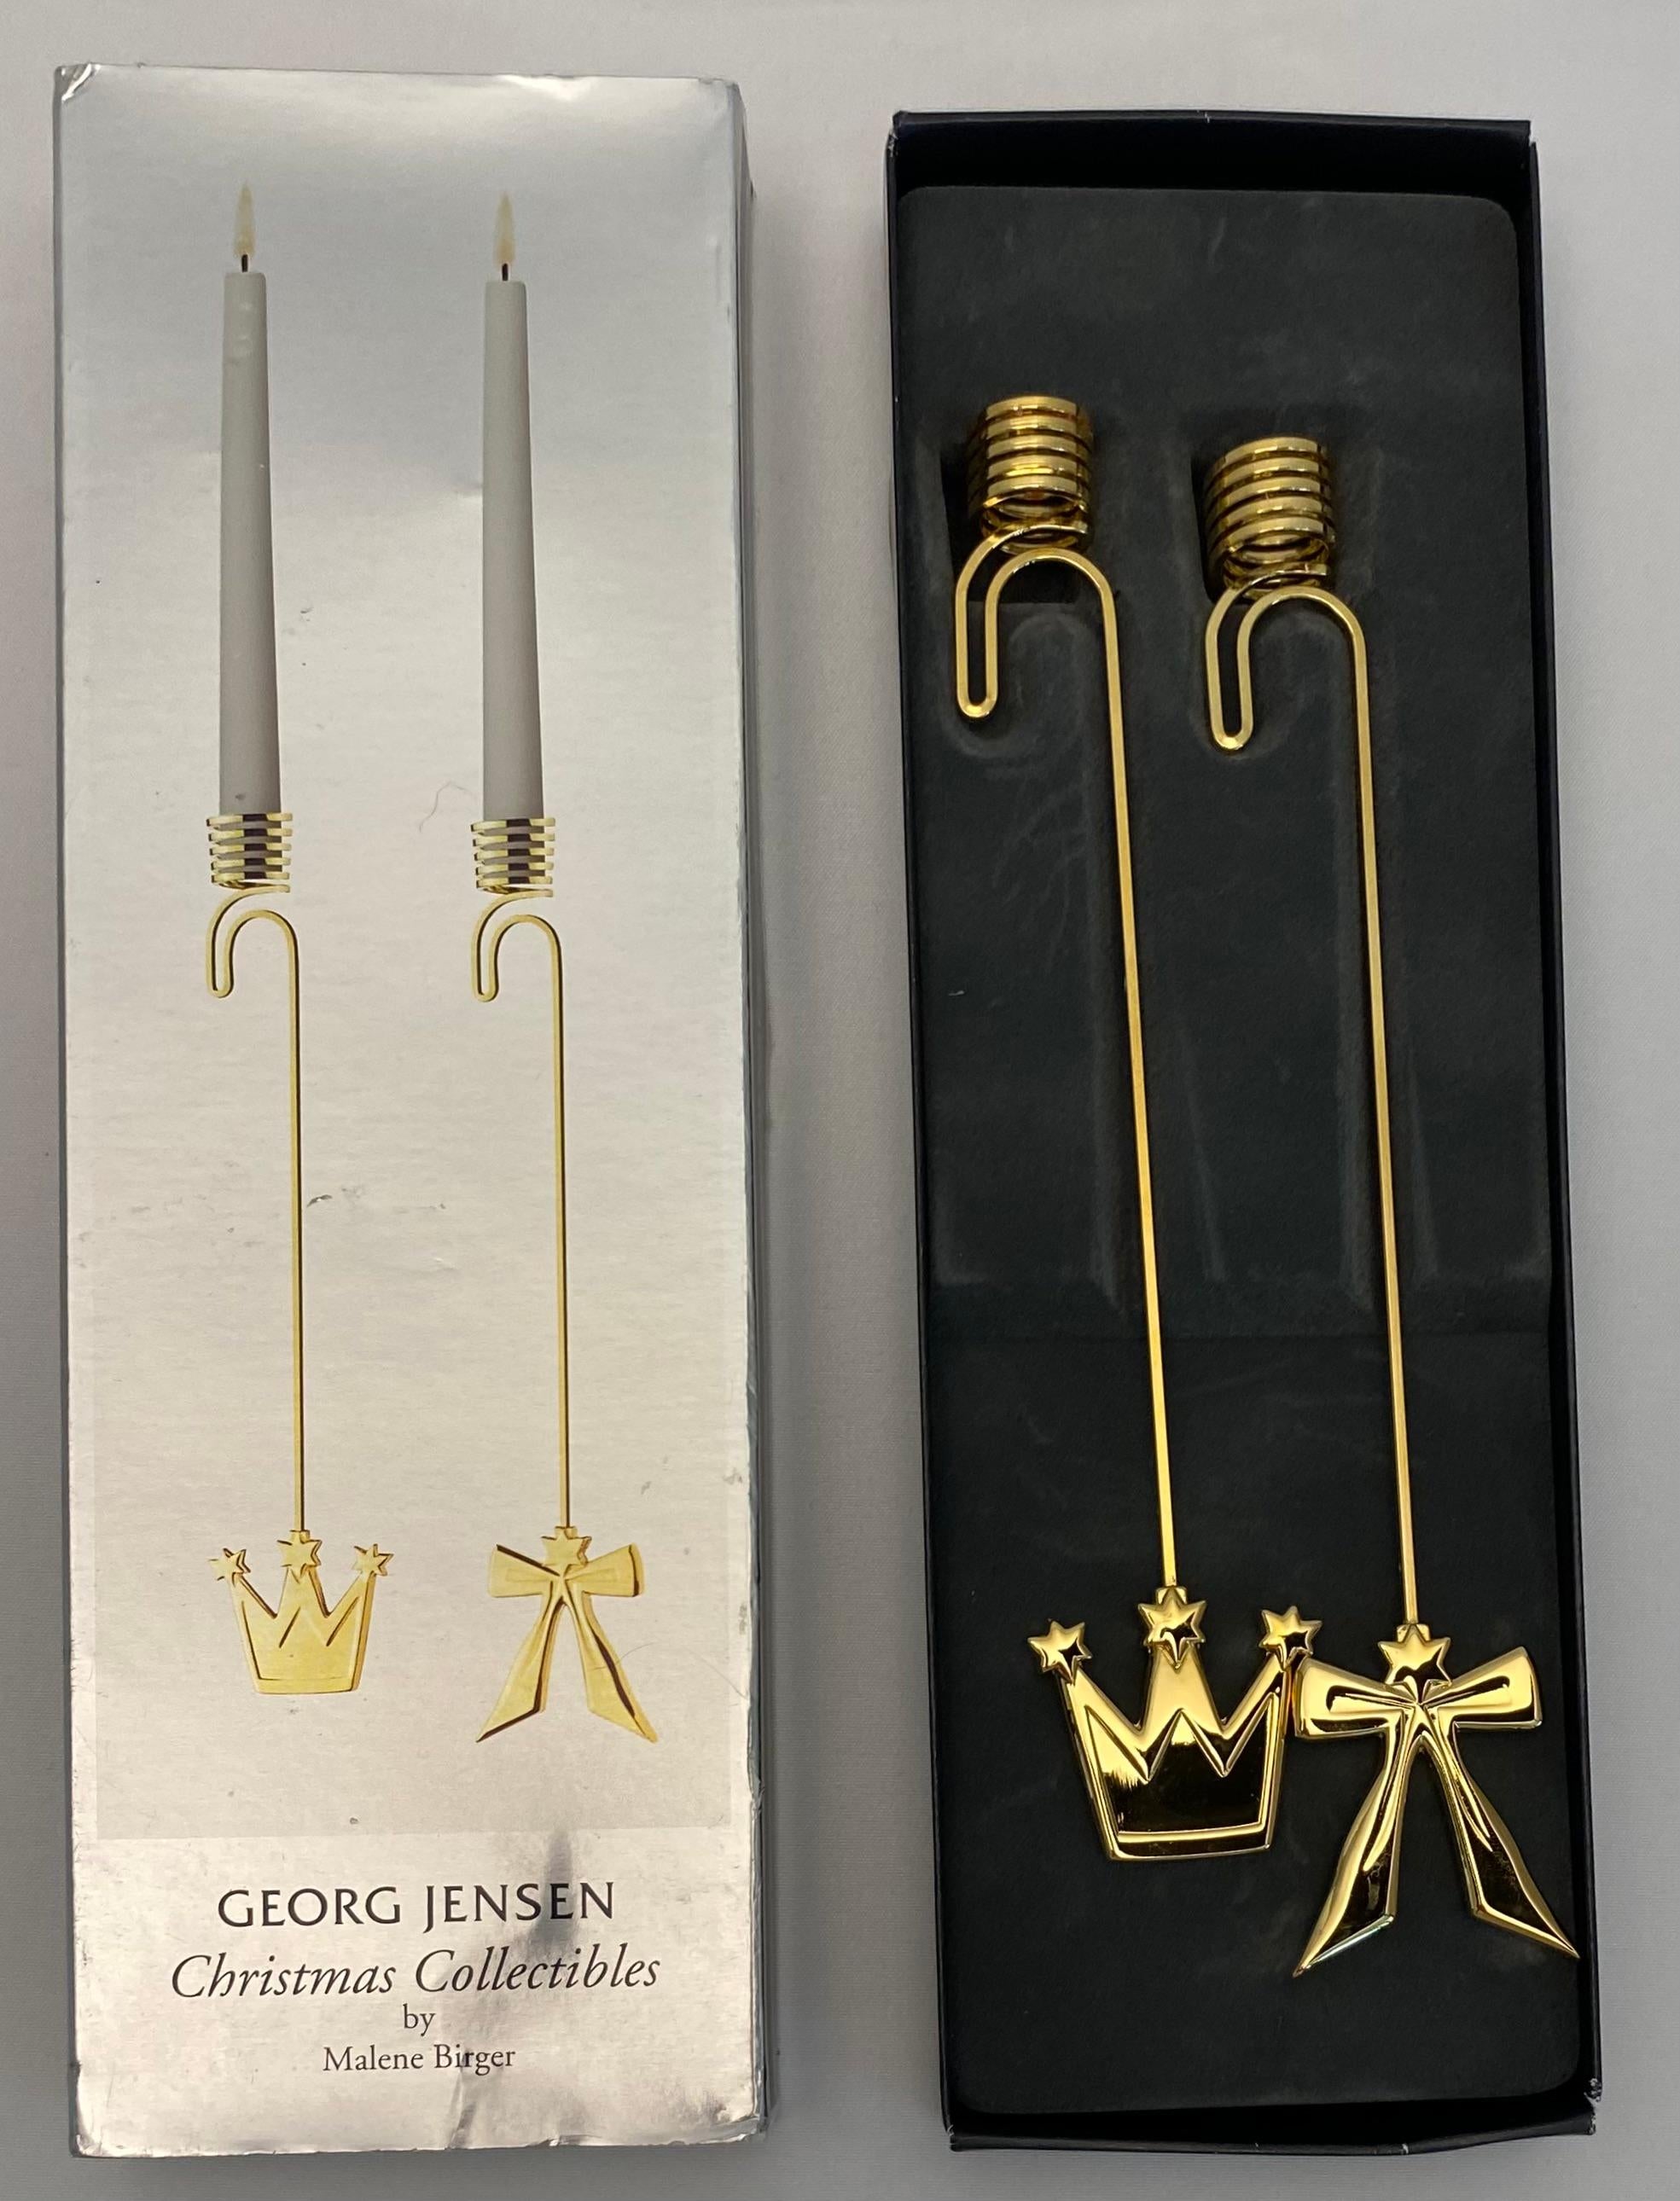 Christmas ornaments designed by Malene Birger for Georg Jensen. The ornaments are made of brass and gilded with 24-carat gold.

Measures: 7